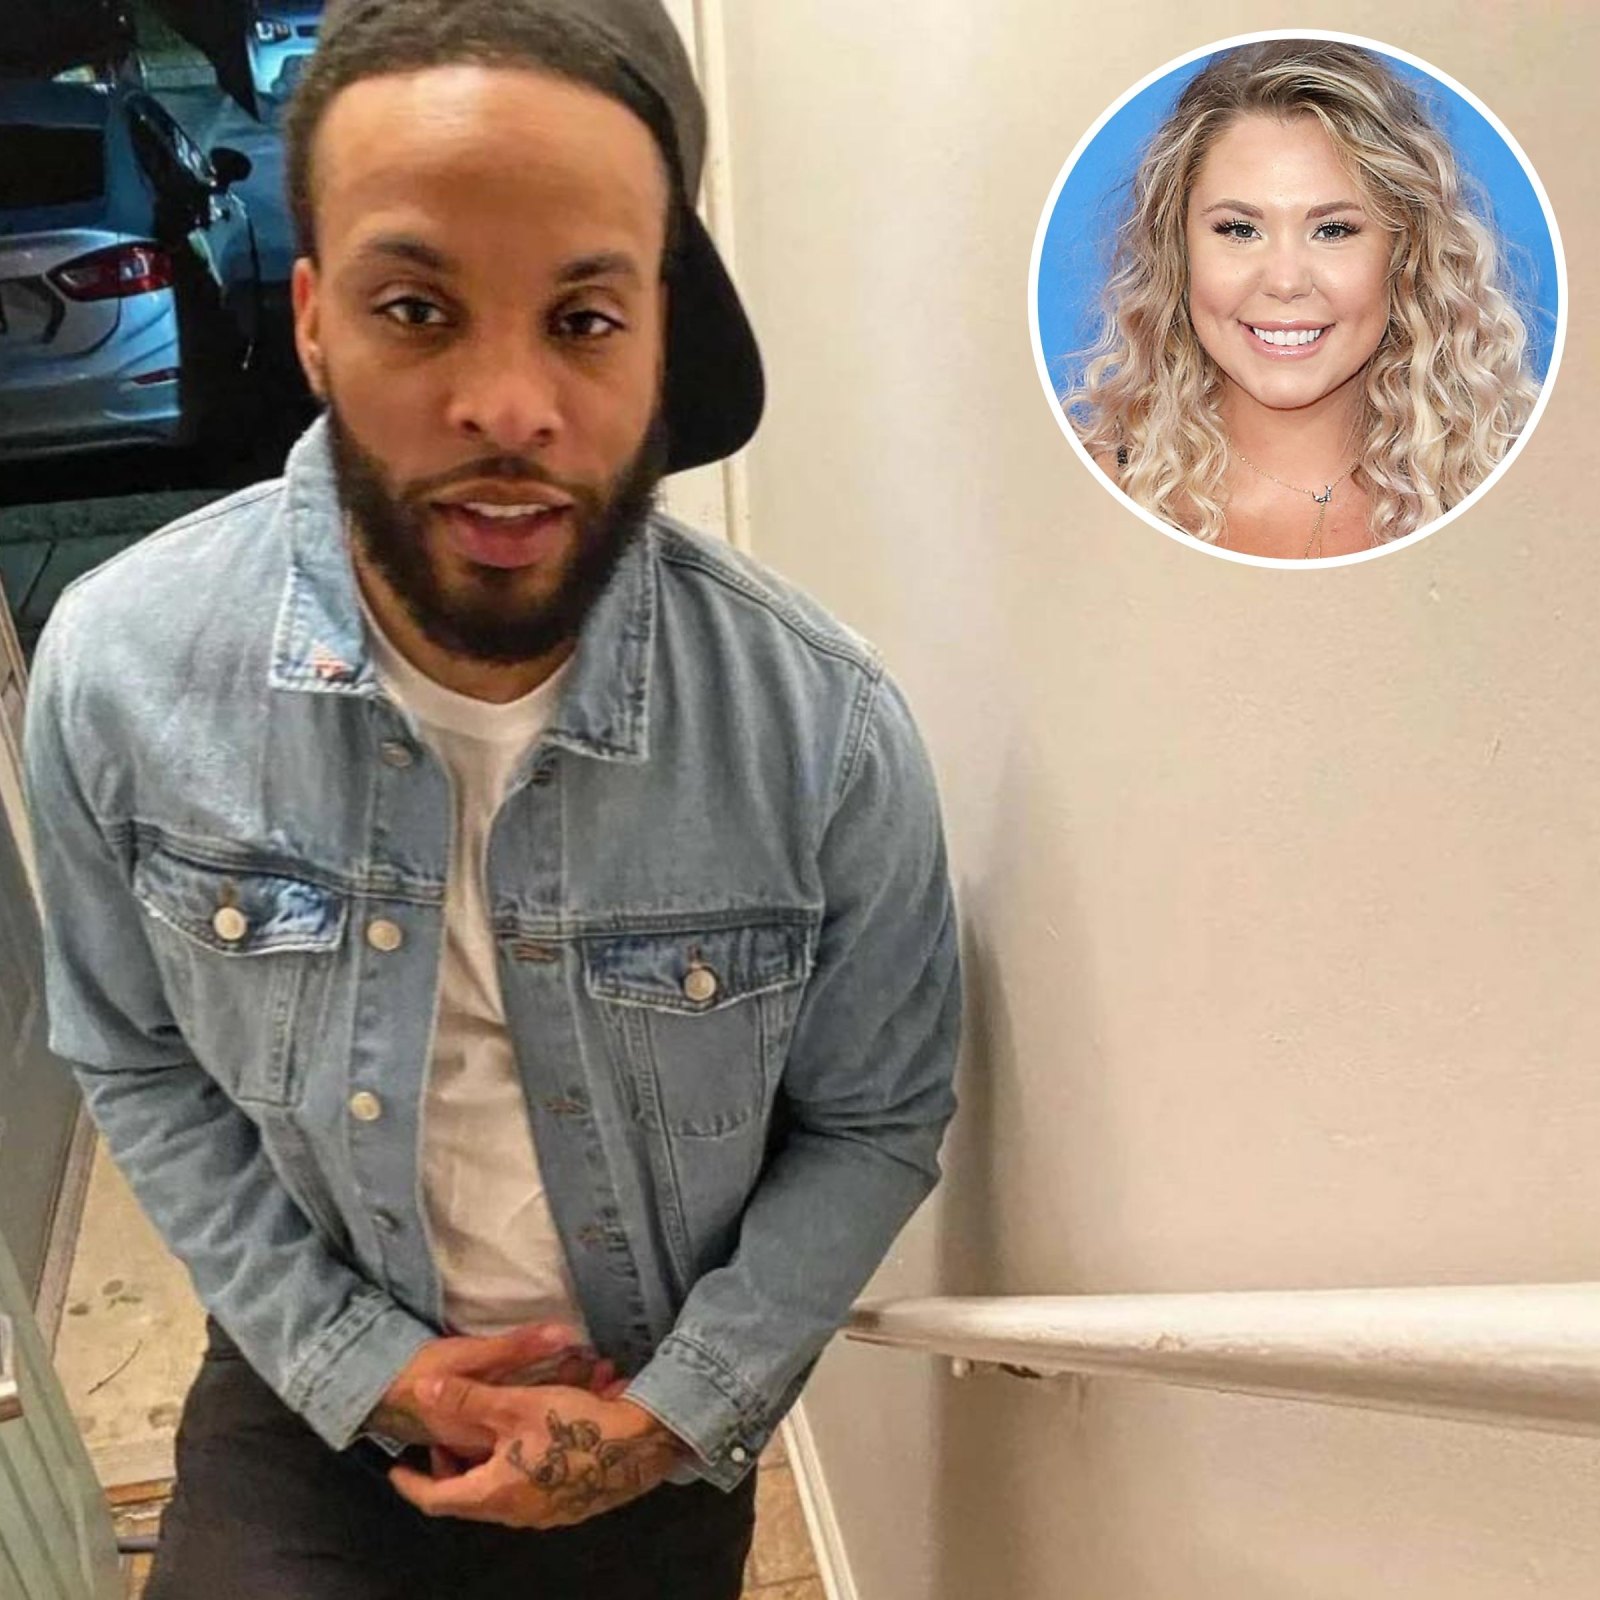 Kailyn Lowry Has a New Boyfriend: Details on Relationship | In Touch Weekly